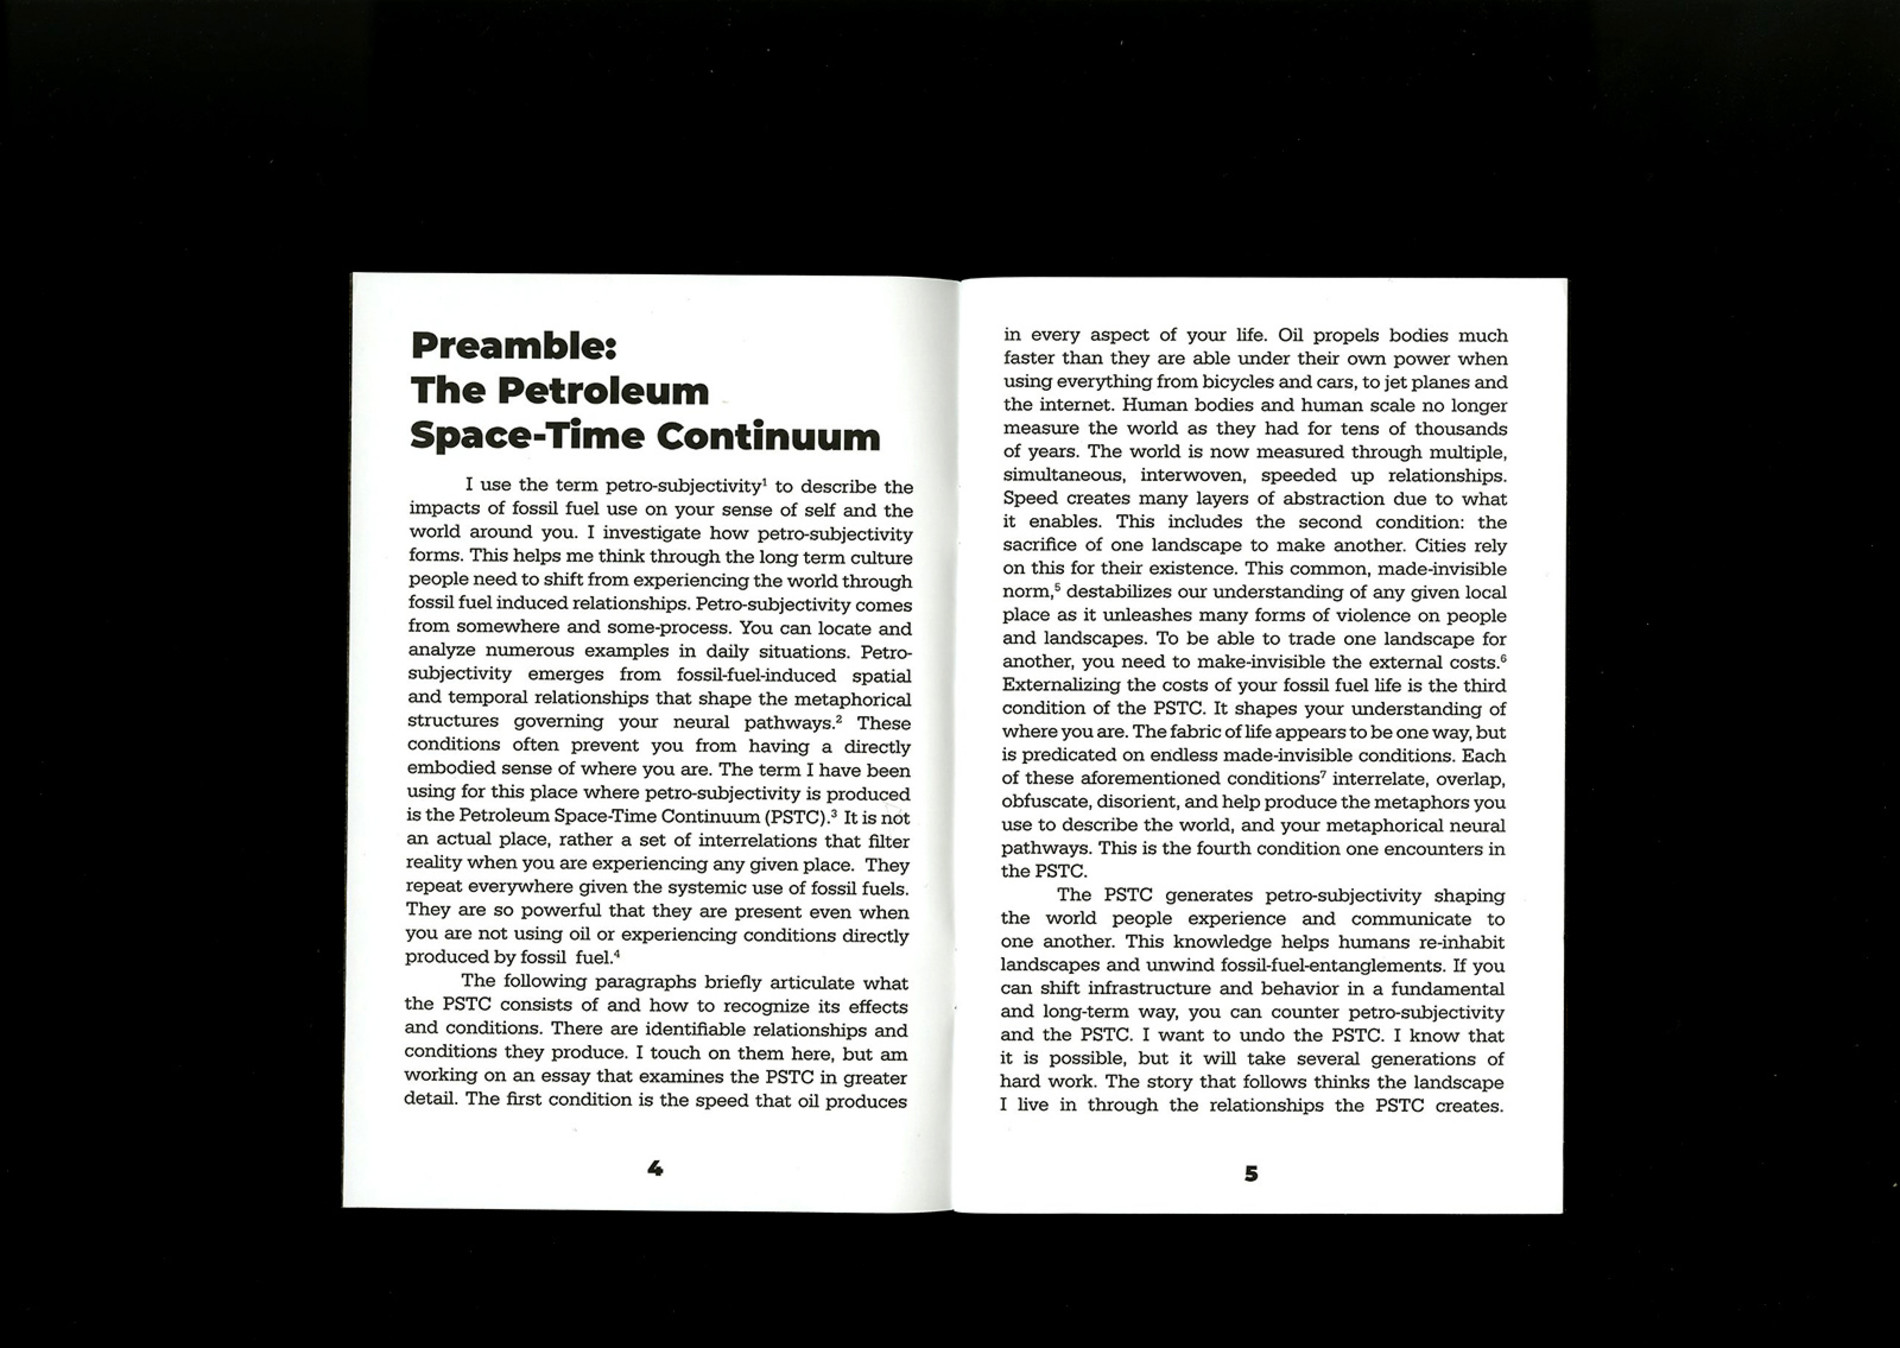 Temporary Services / Half Letter Press Two Ponds: Stories from The Petroleum Space-Time Continuum